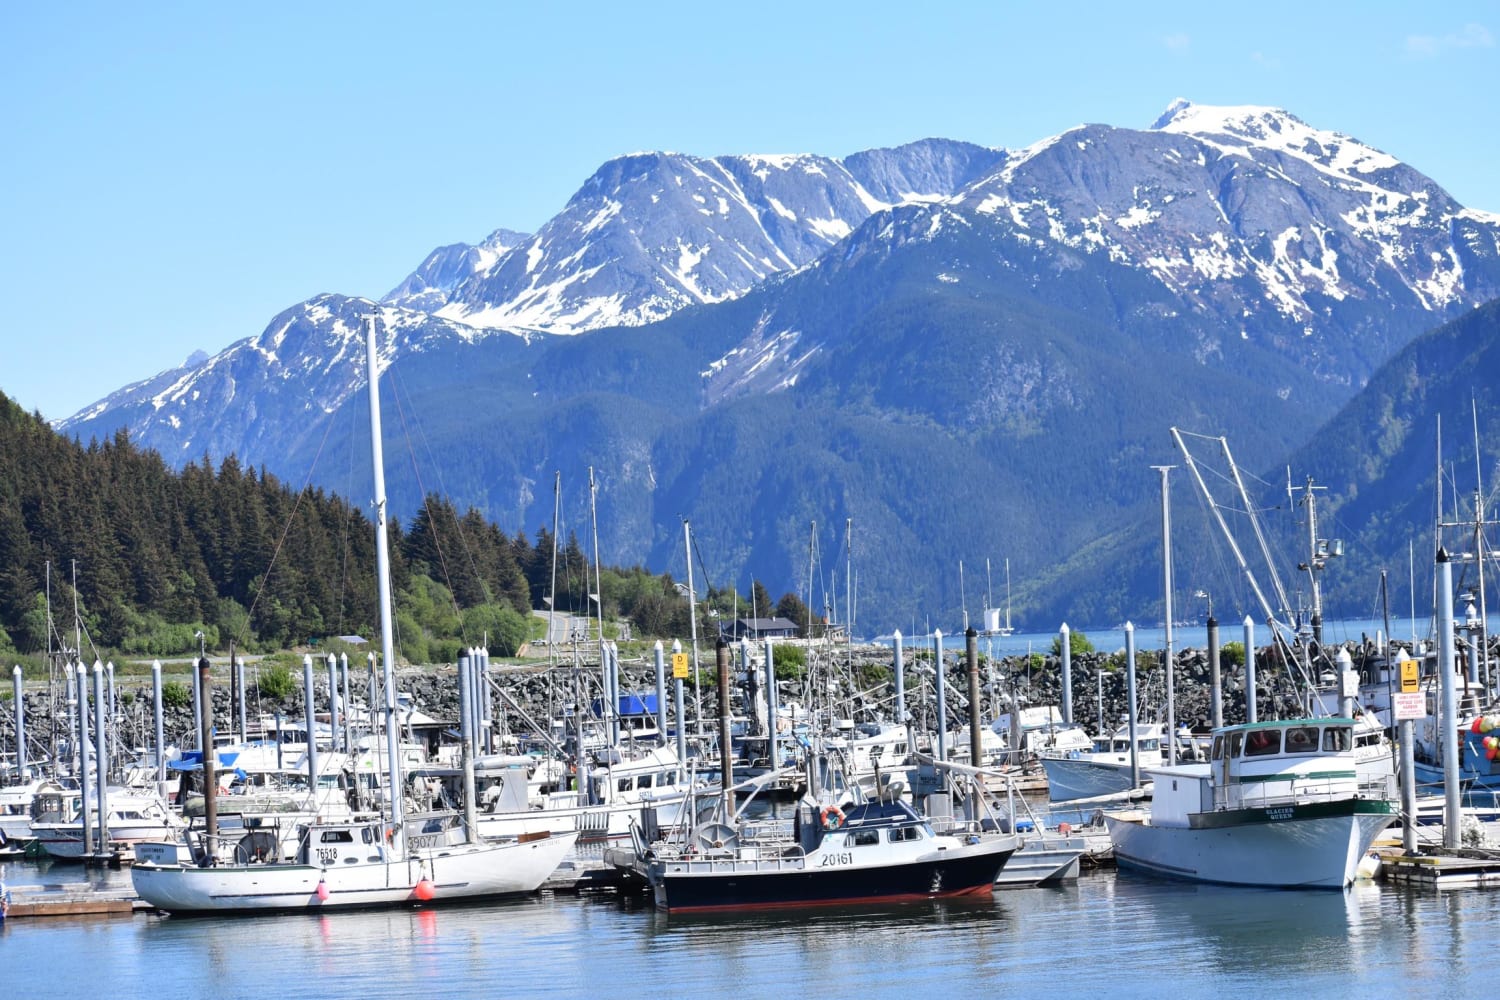 Haines, Alaska, USA is such a beautiful and serene place. Taken 5/21/20.